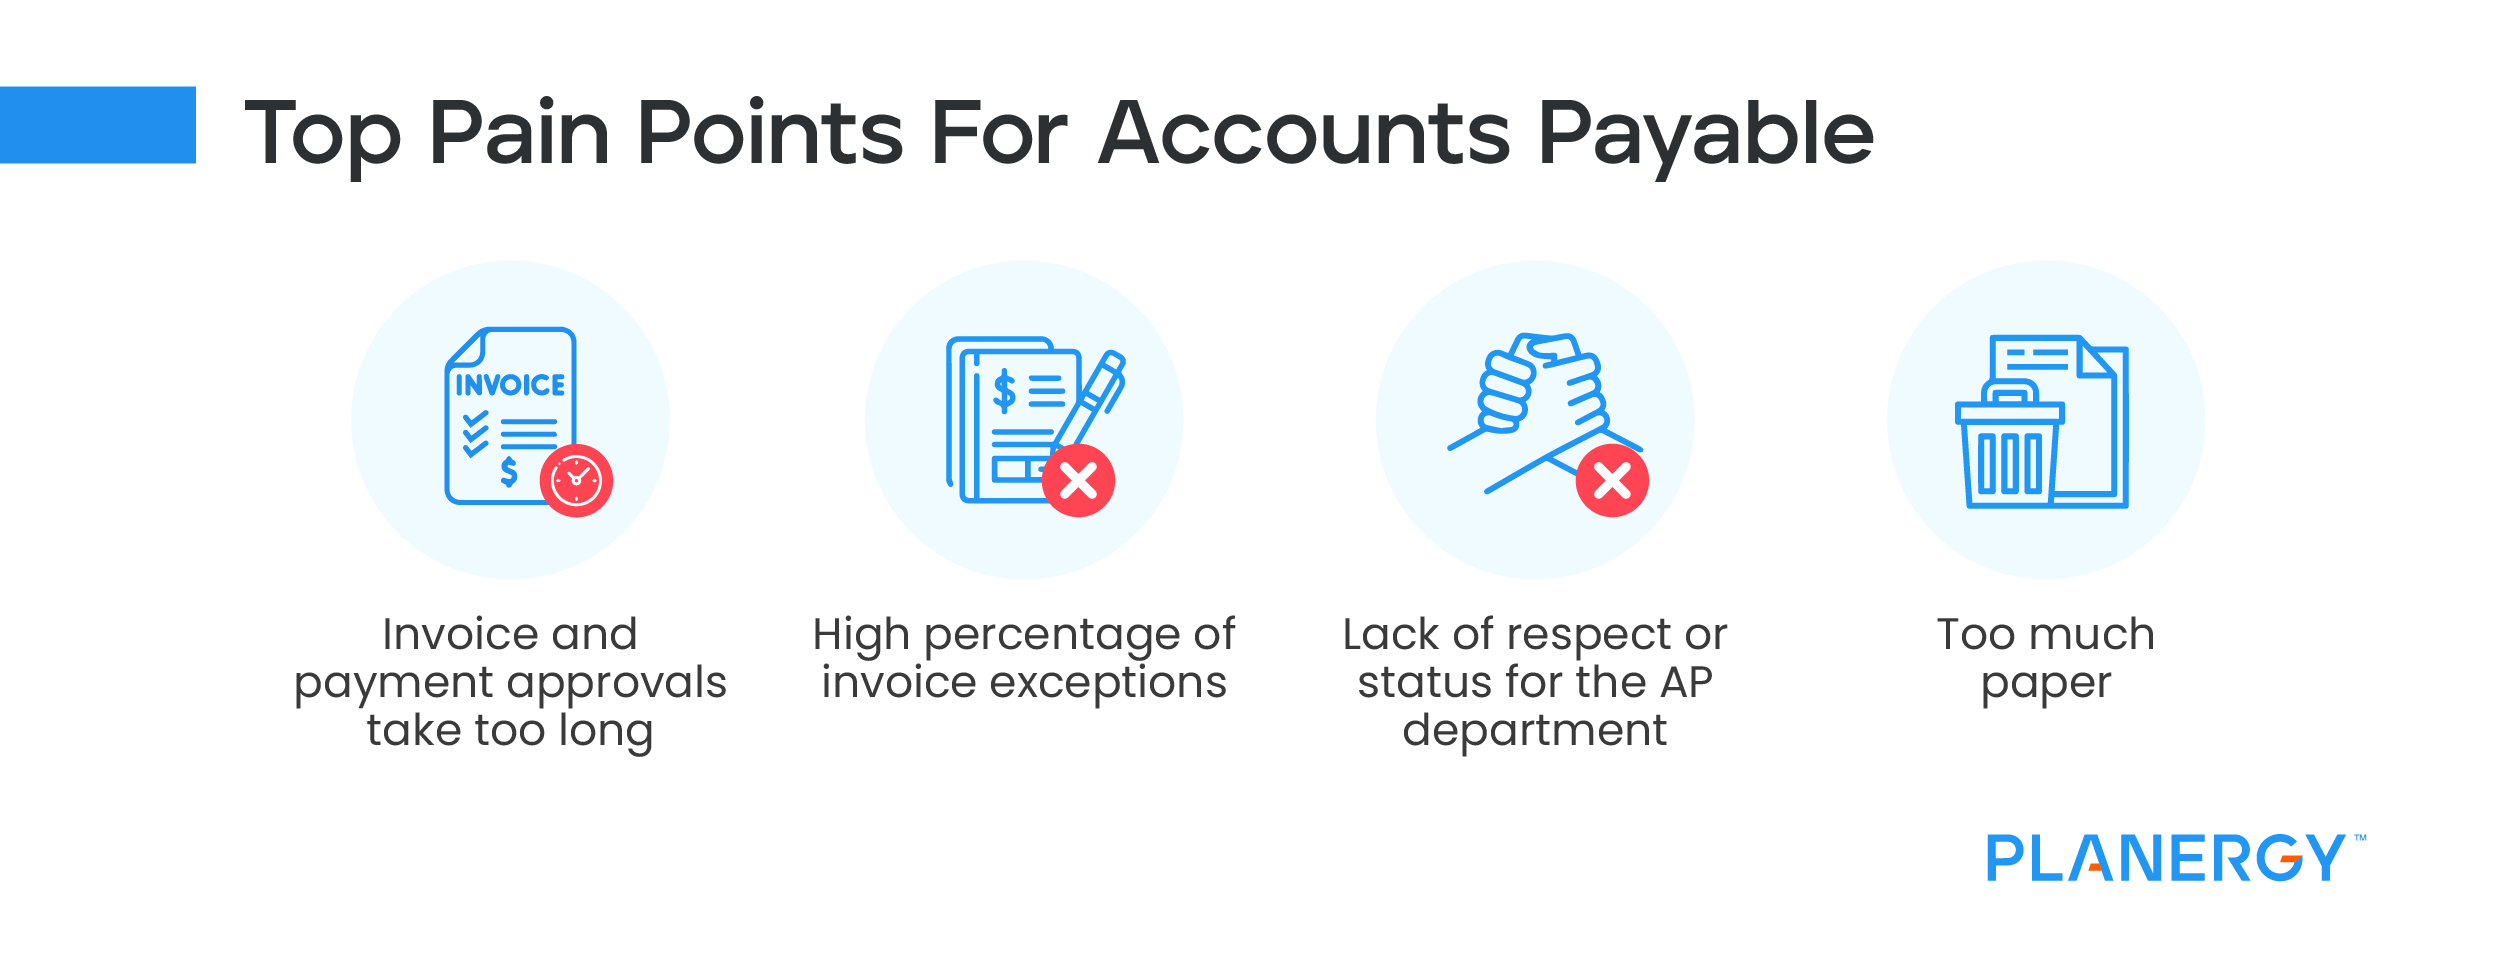 Top Pain Points for Accounts Payable